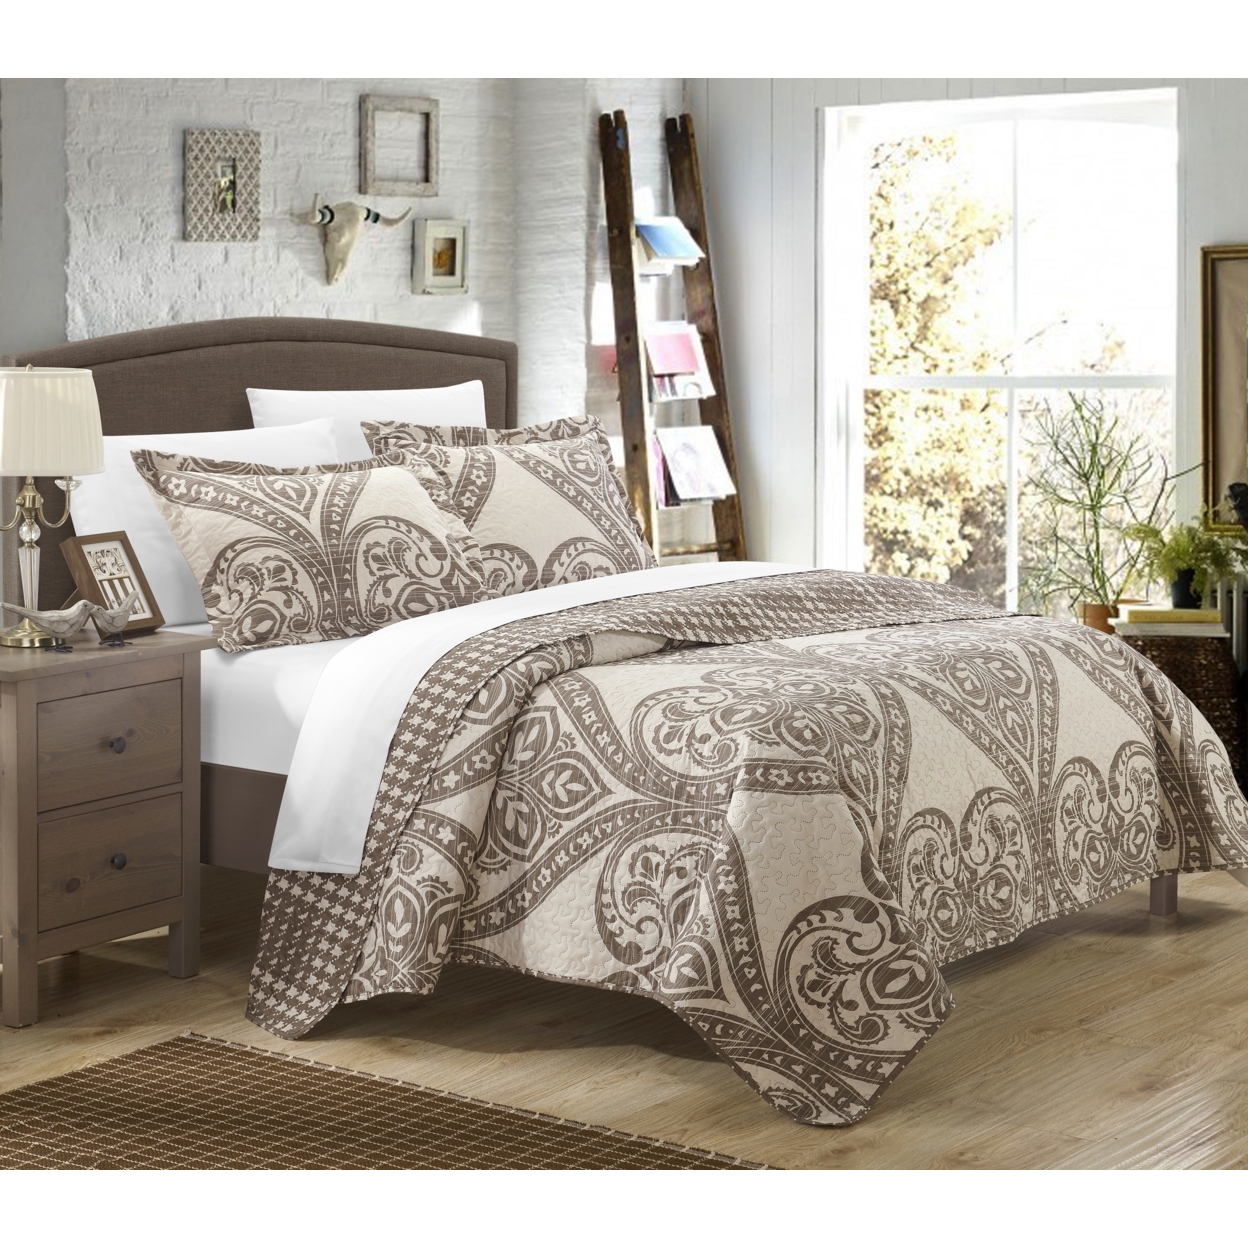 3 Or 2 Piece Revenna REVERSIBLE Printed Quilt Set. Front A Traditional Pattern And Reverses Into A Houndstooth Pattern - Beige, King